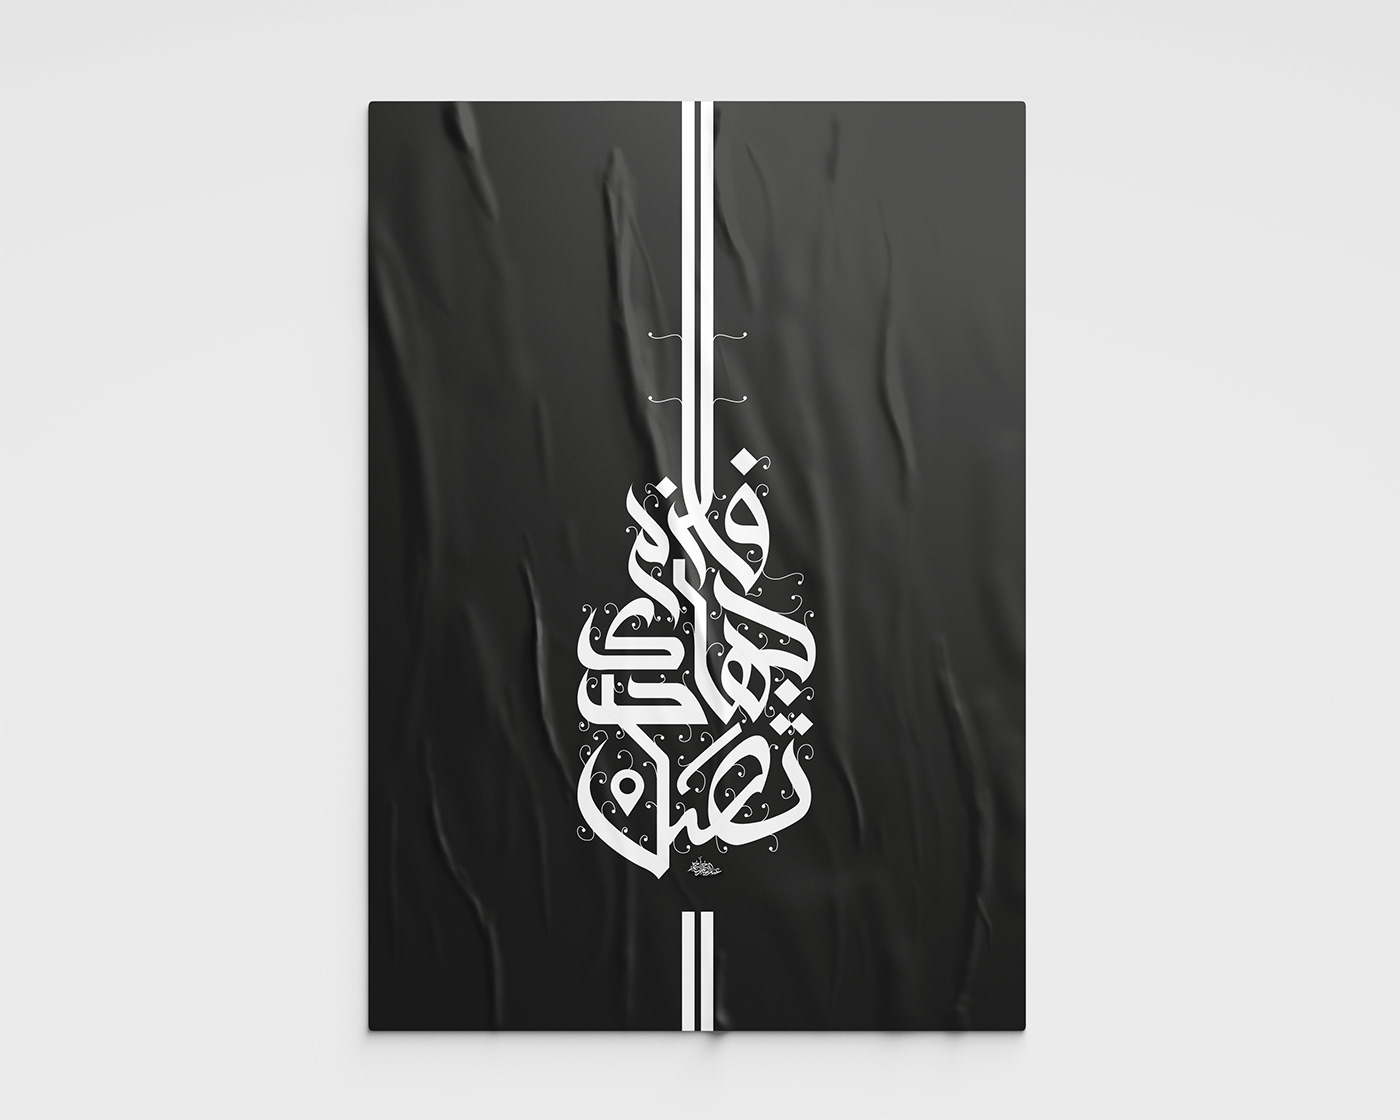 @adobe #Arabic Typography #behance #Calligraphy #design inspiration #Dribbble #features #poster design #typogrpgy #typoster